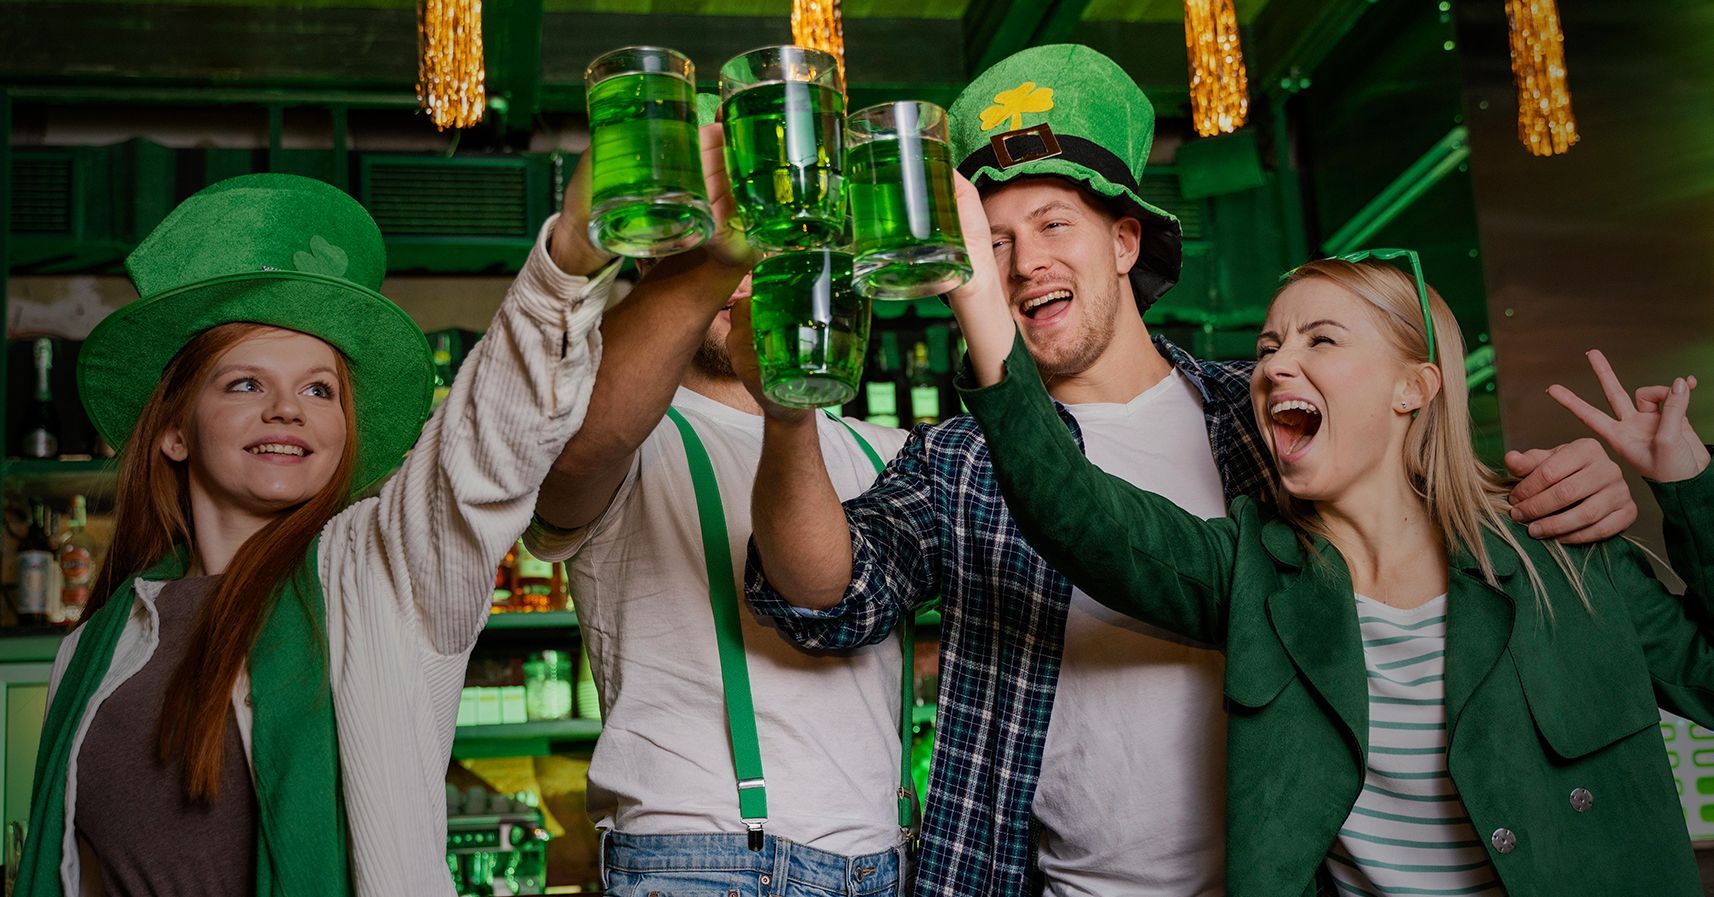 A group of people are toasting with green beer mugs in a bar.